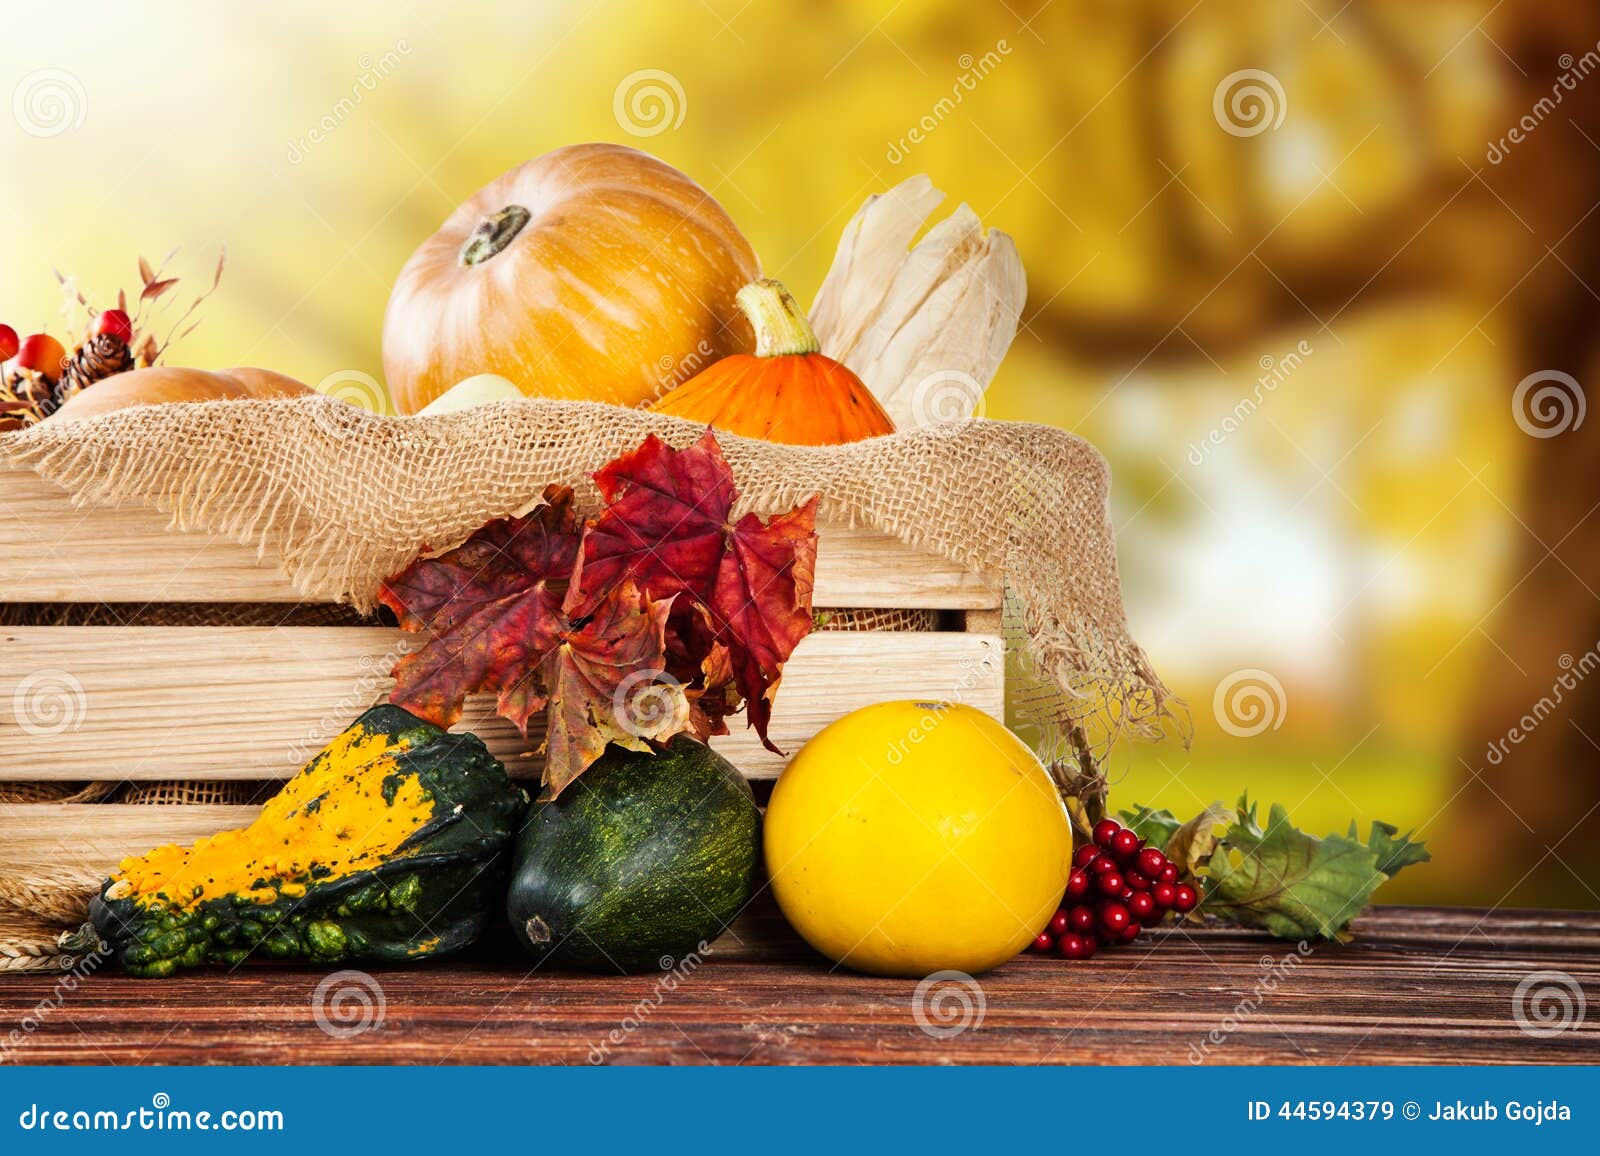 Autumn Agriculture Products on Wood Stock Image - Image of harvest ...